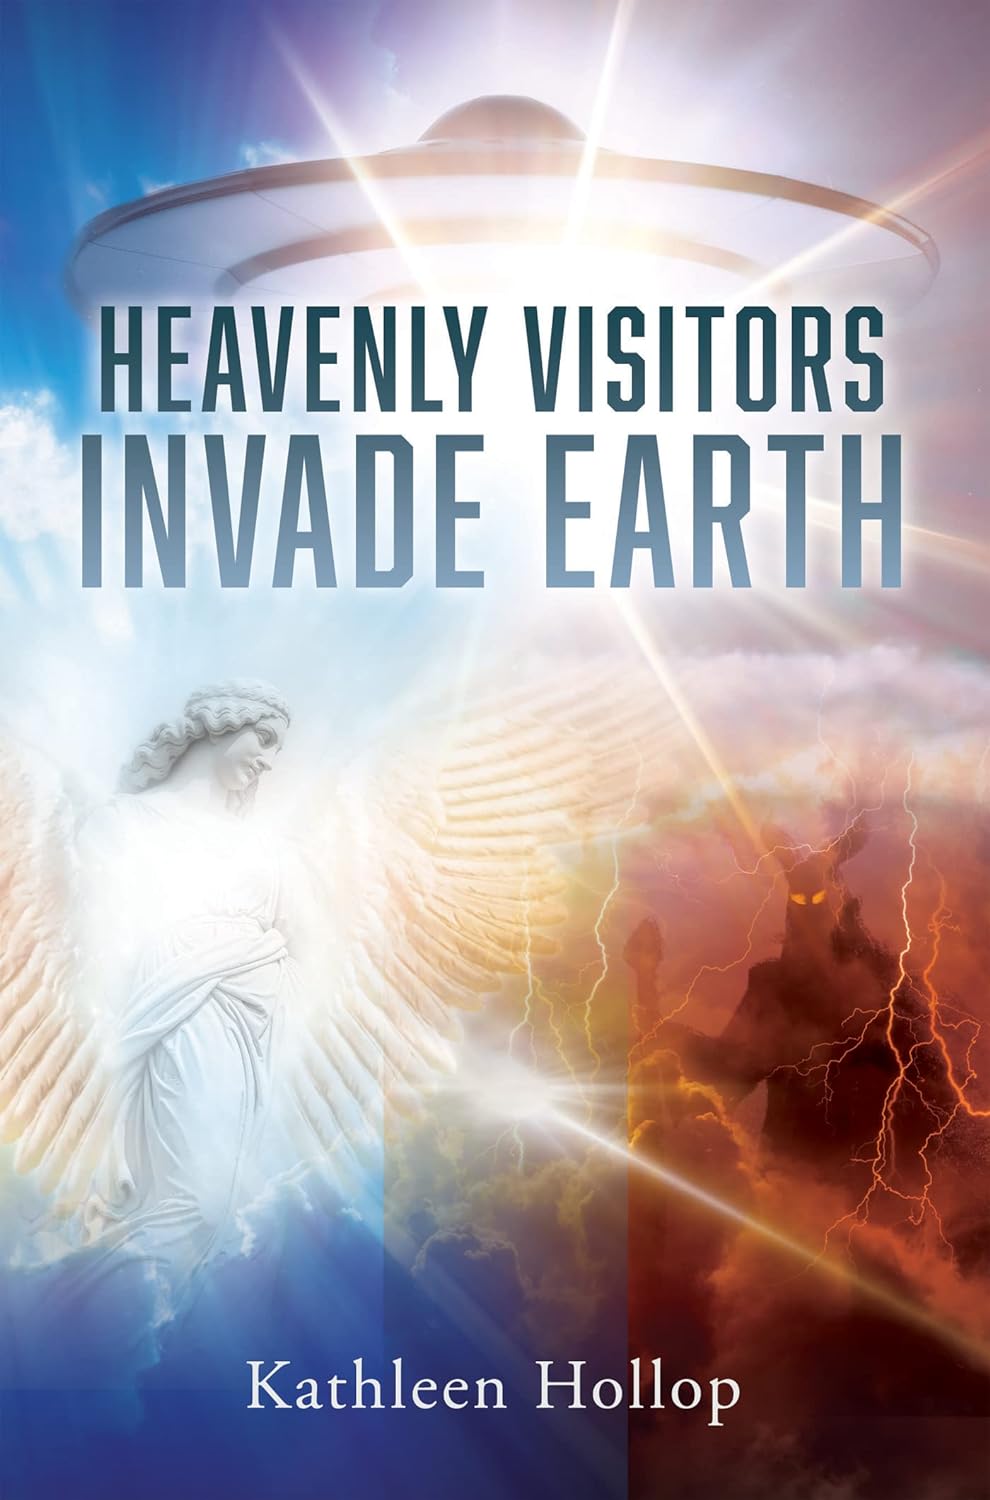 Ink Start Media Presents Kathleen Hollop's Riveting New Release: "Heavenly Visitors Invade Earth"